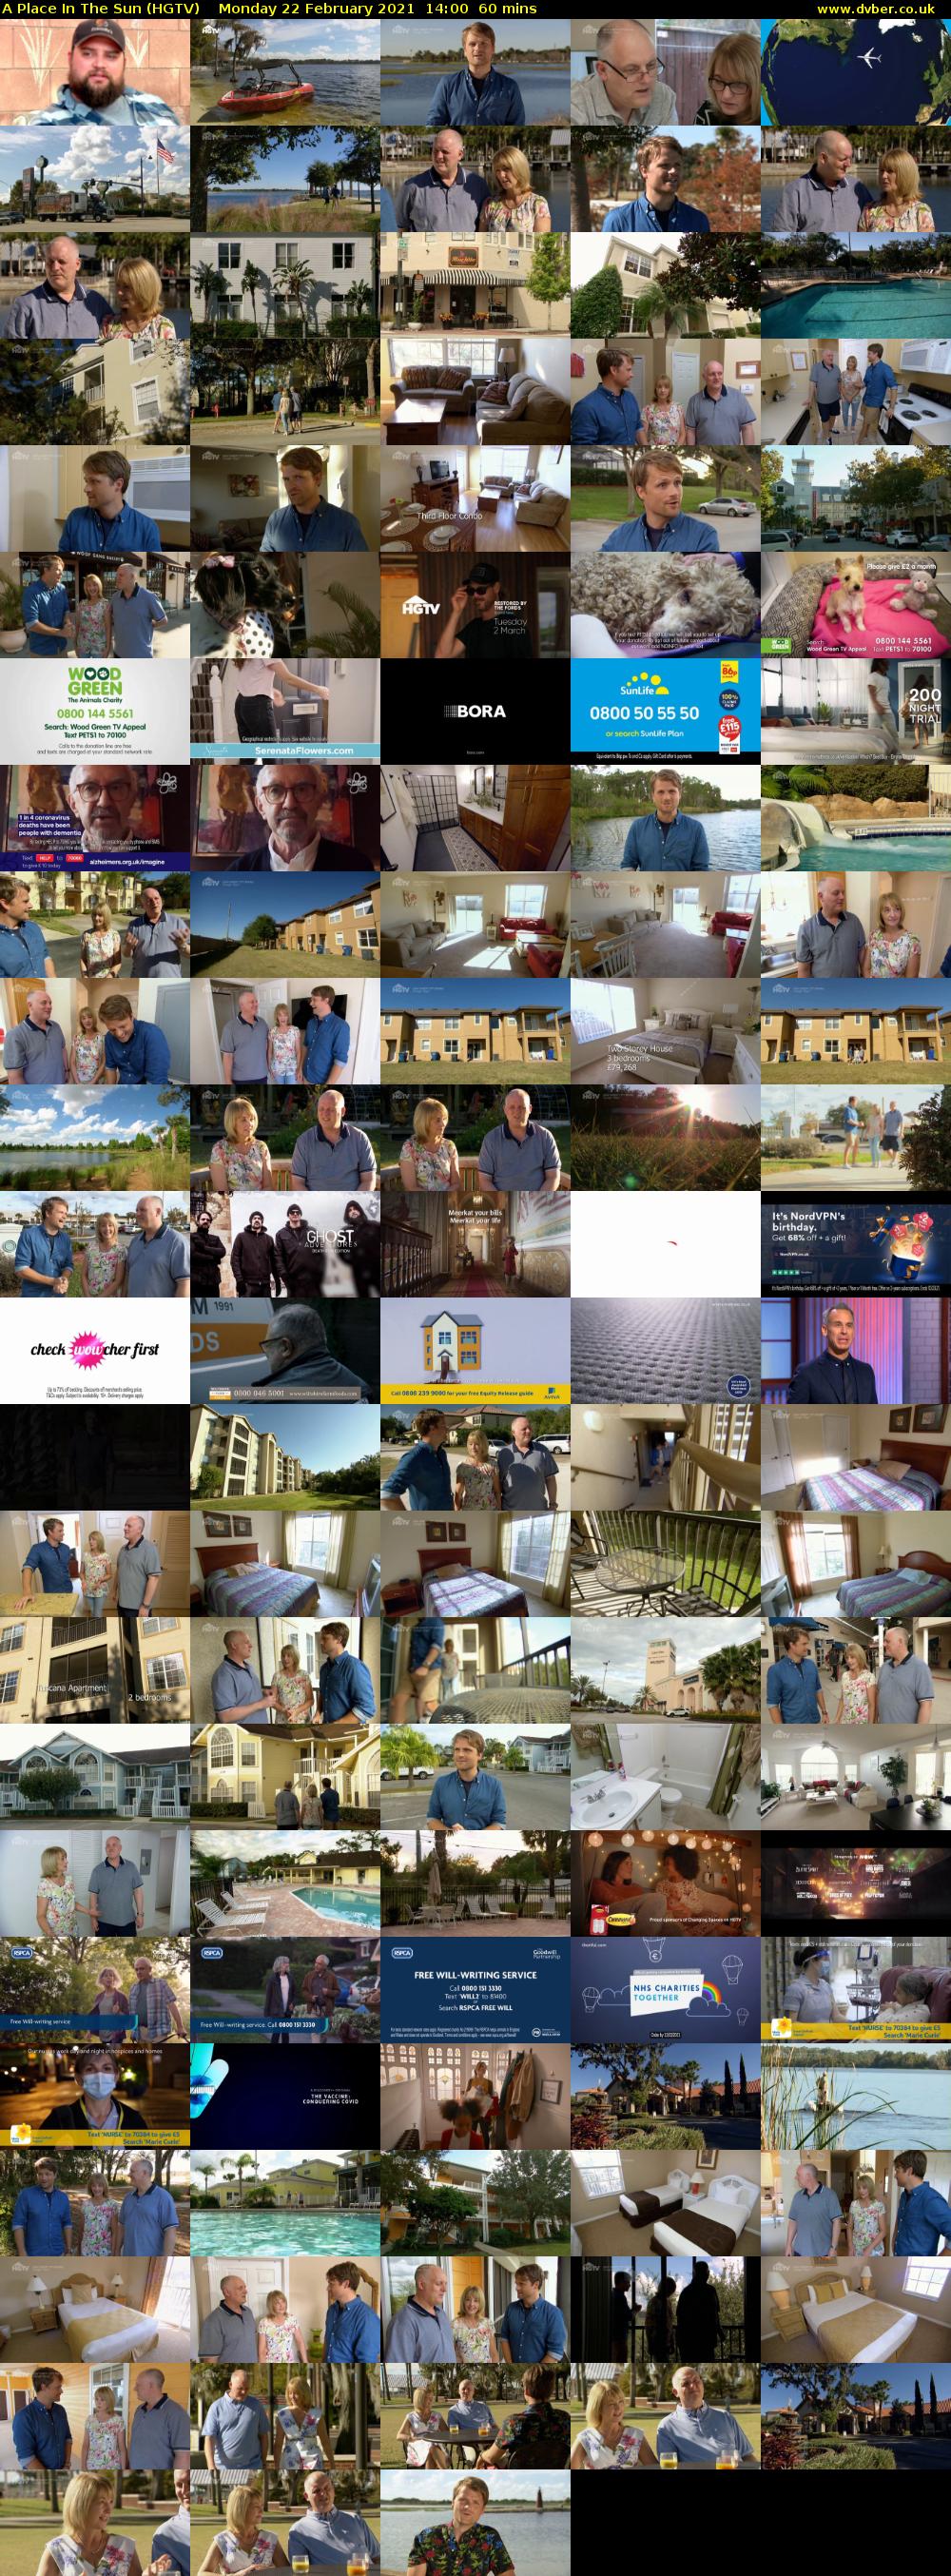 A Place In The Sun (HGTV) Monday 22 February 2021 14:00 - 15:00